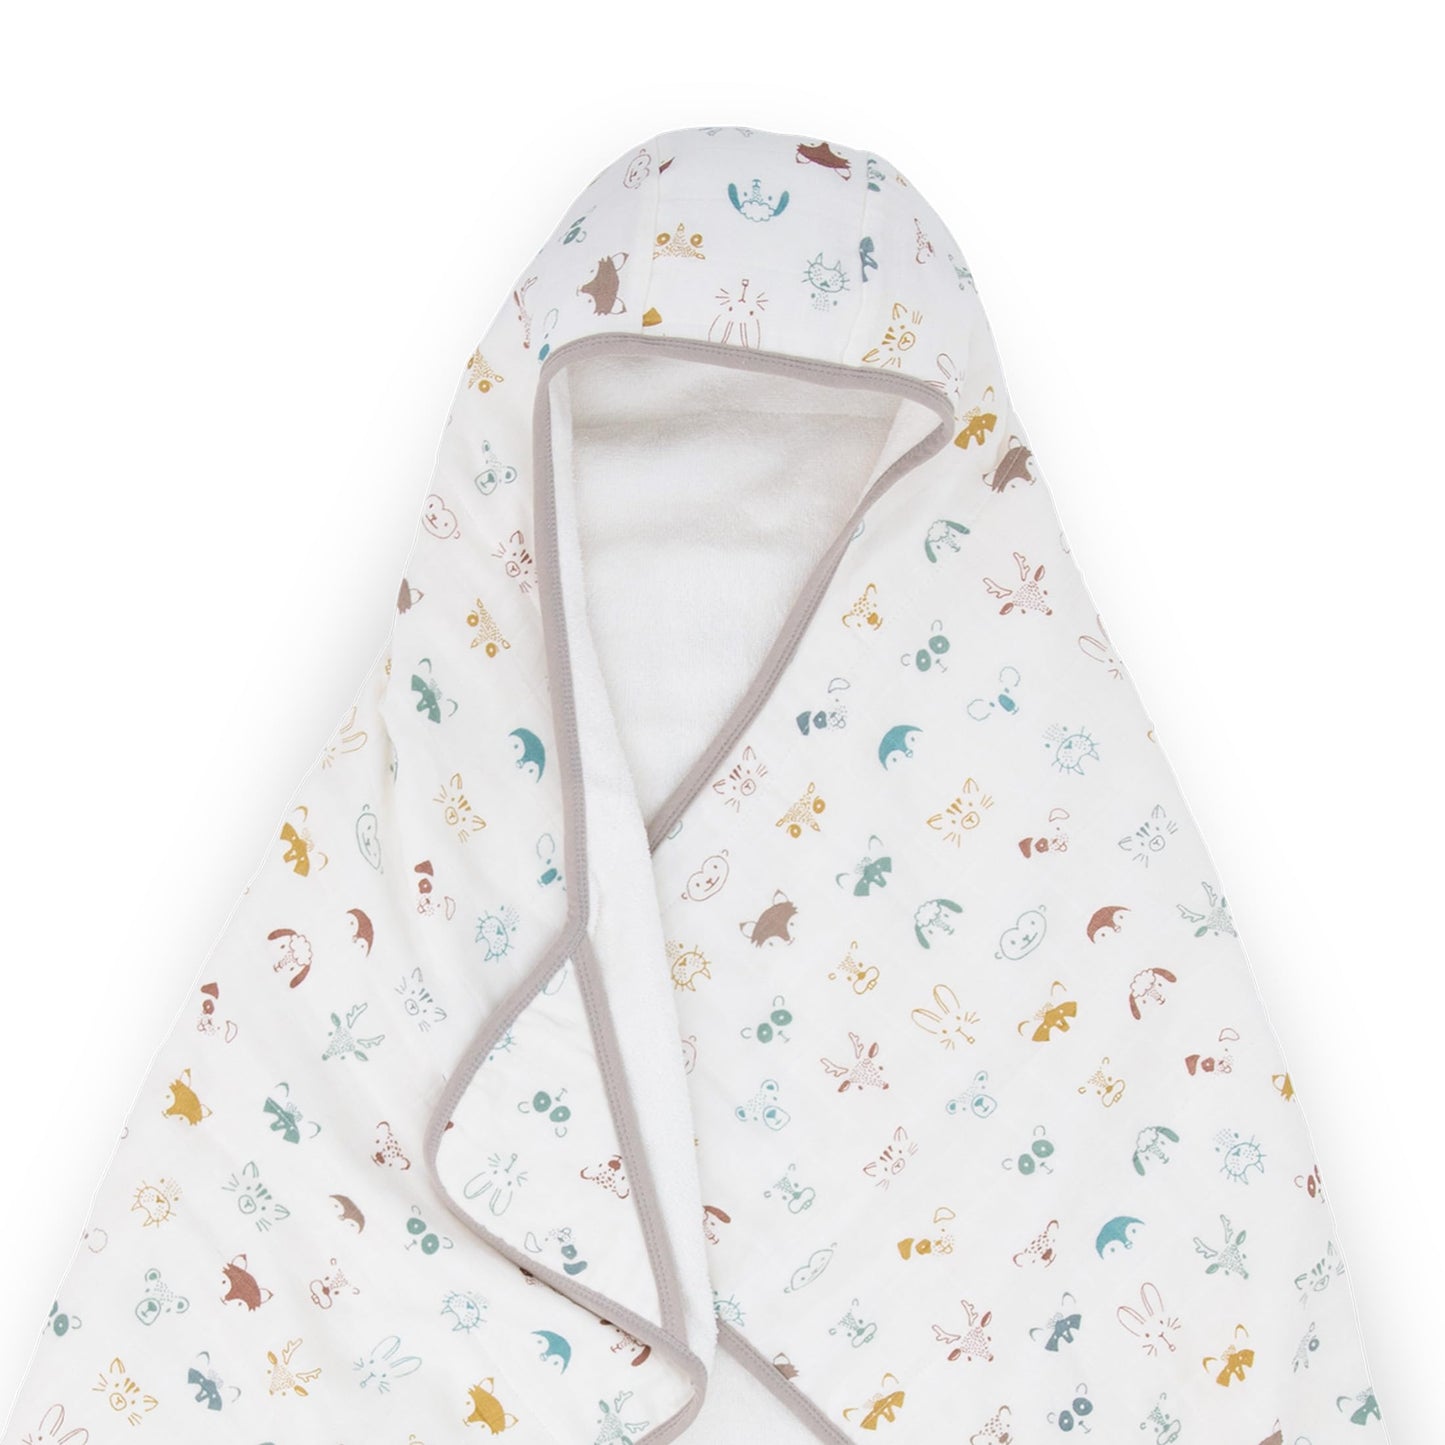 Little Unicorn Large Cotton Hooded Towel – 100% Cotton – 42” Tall x 47” Wide – Printed Pockets – for 2-5 Year Olds - Machine Washable – Playful Designs – for Boys & Girls (Tropical Leaf)